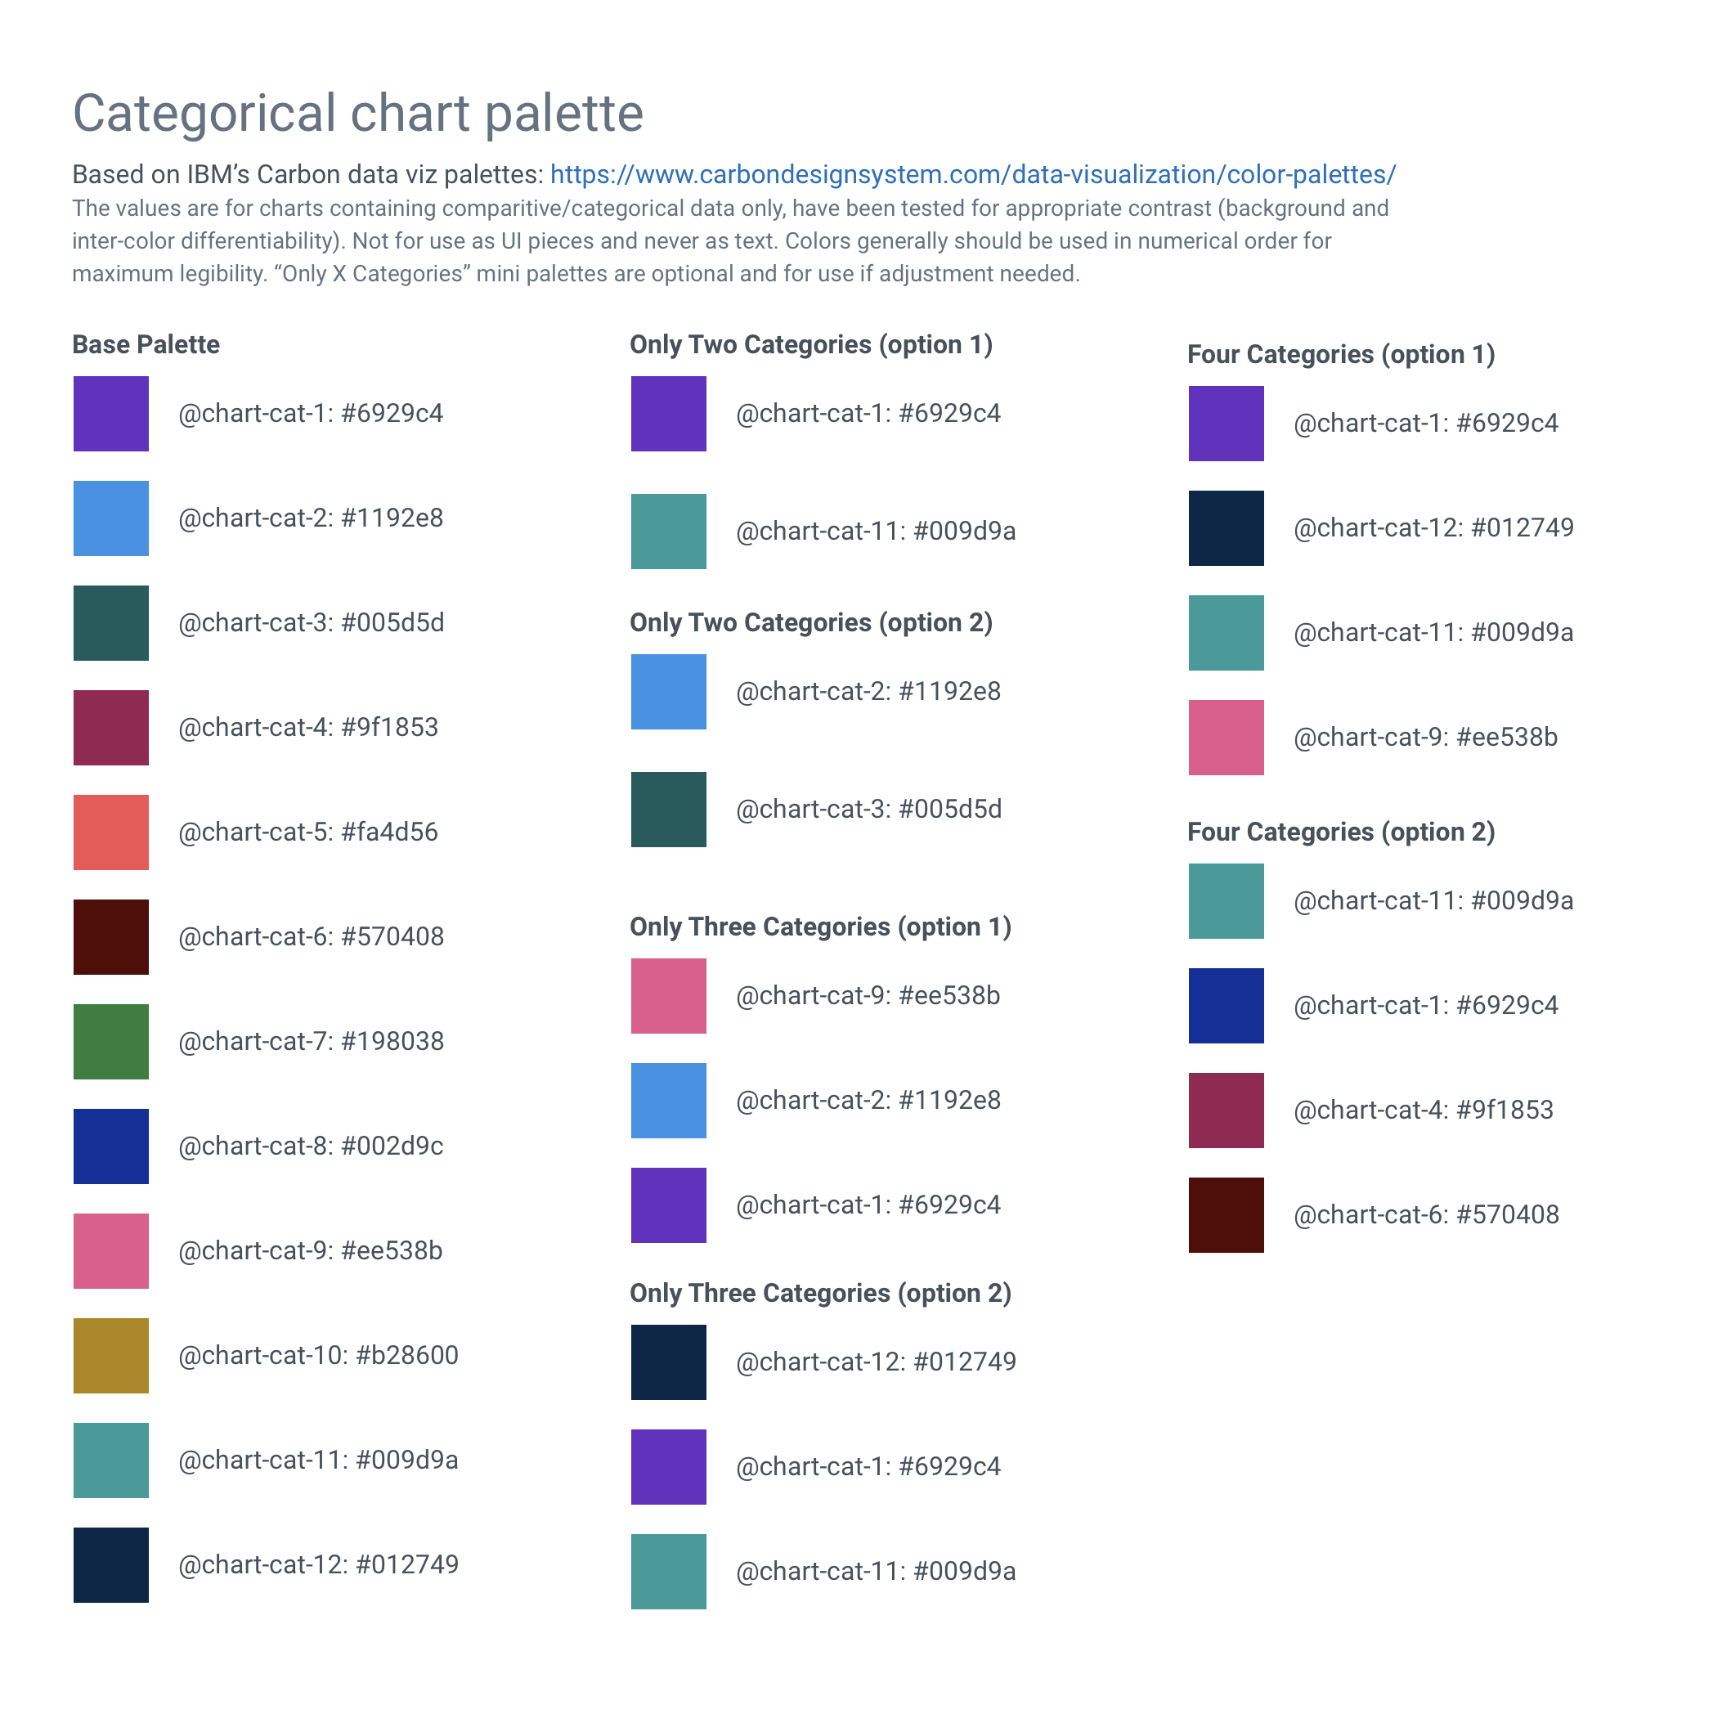 Color palette options provided by IBM Carbon.